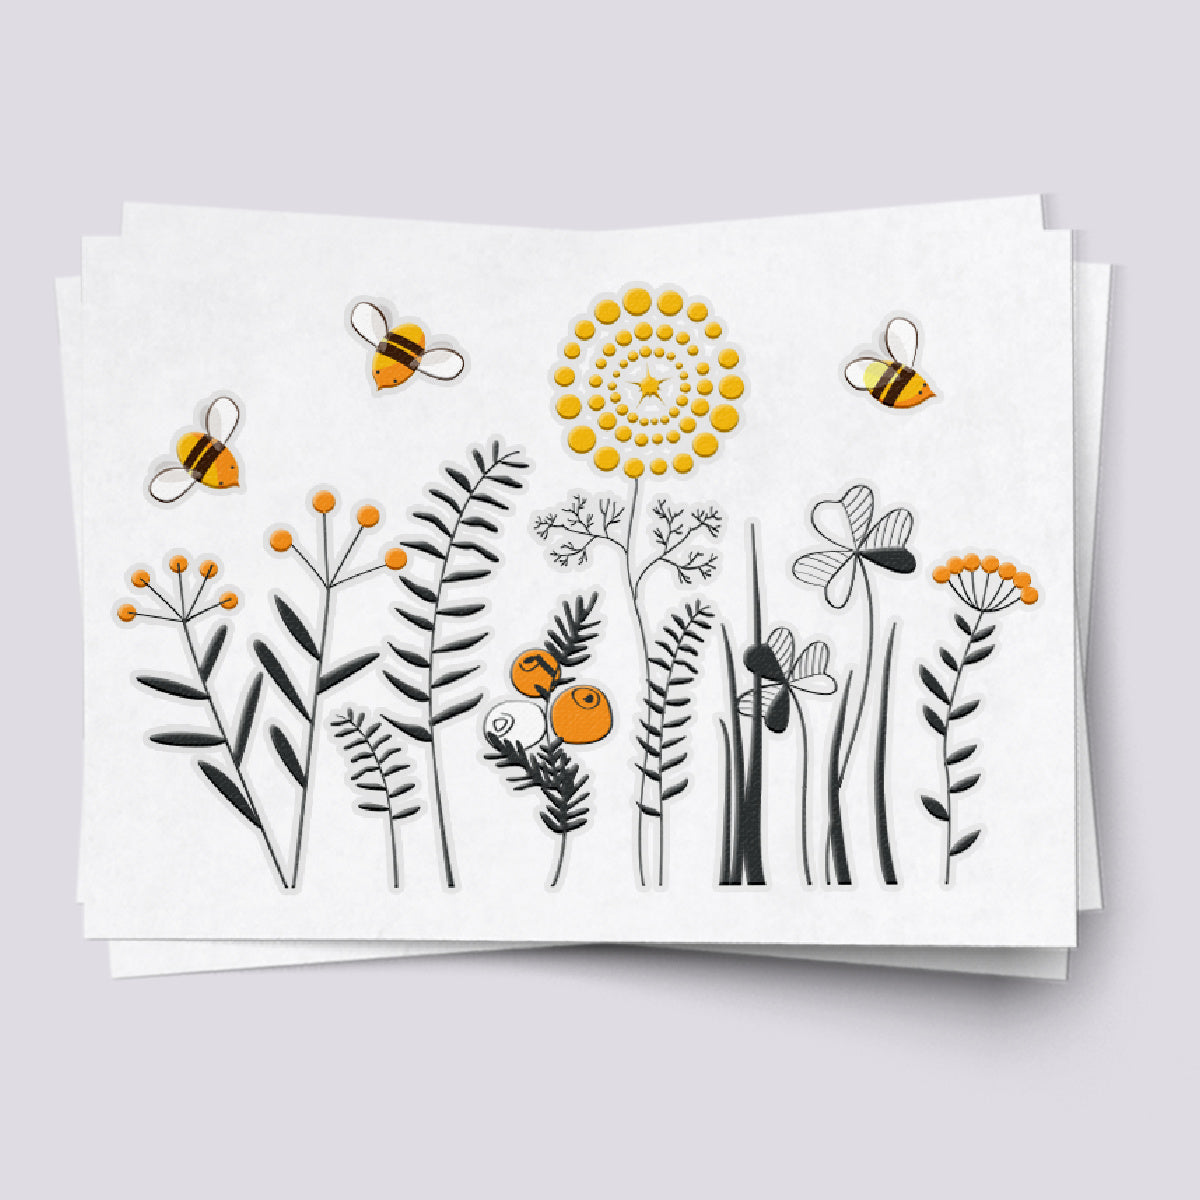 Honey Bees &amp; Wild Flowers Temporary Tattoos - Kids Party Fun